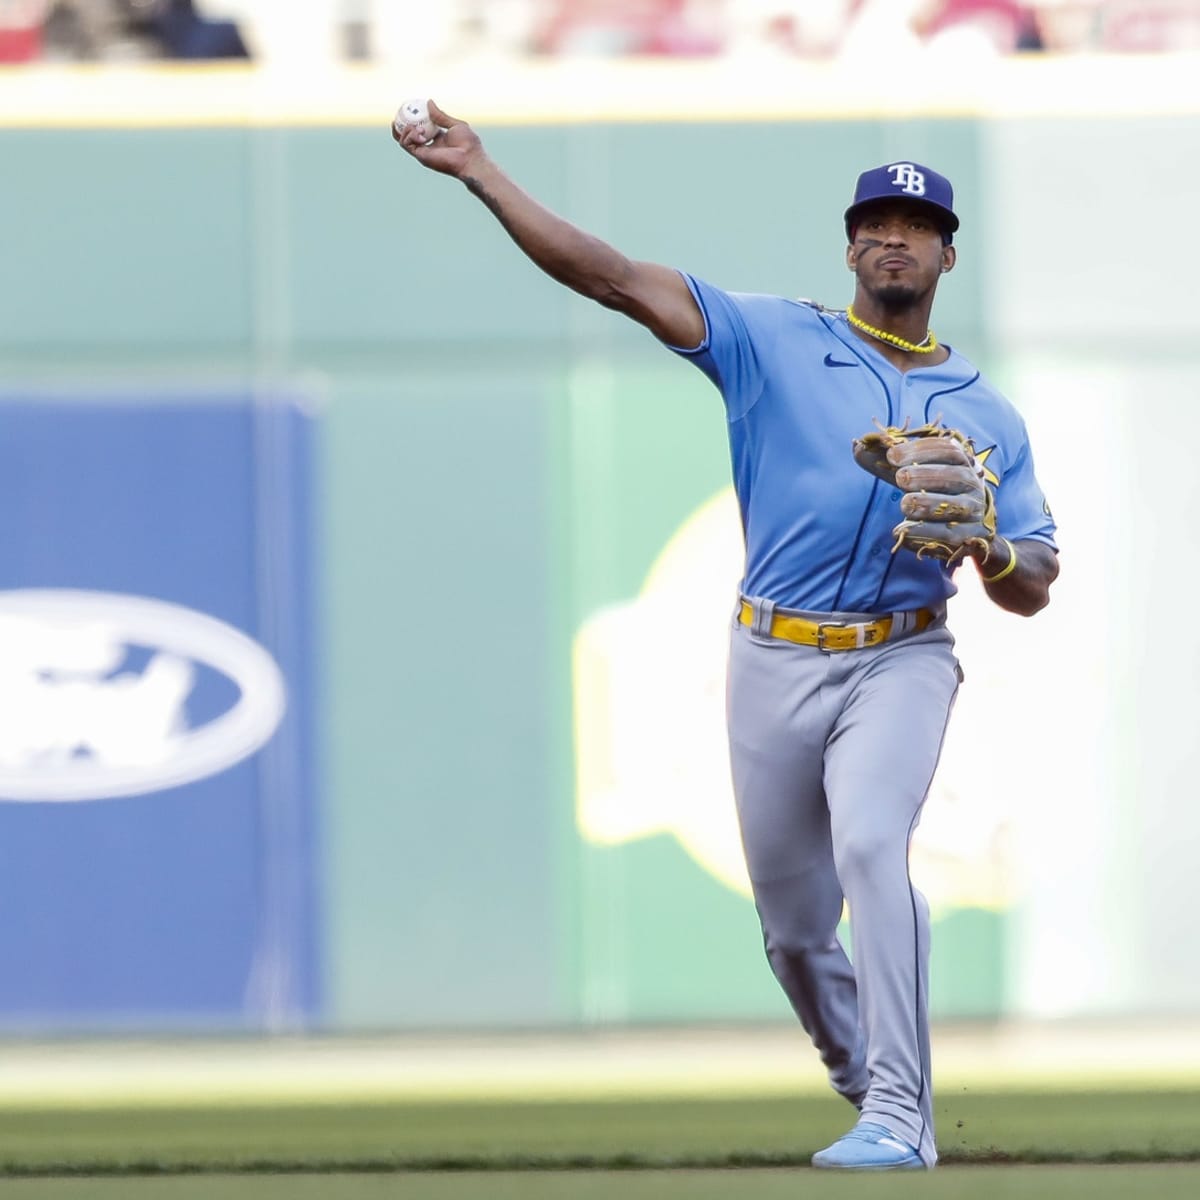 Tampa Bay Rays' Wander Franco heads Minor League Players of the Week